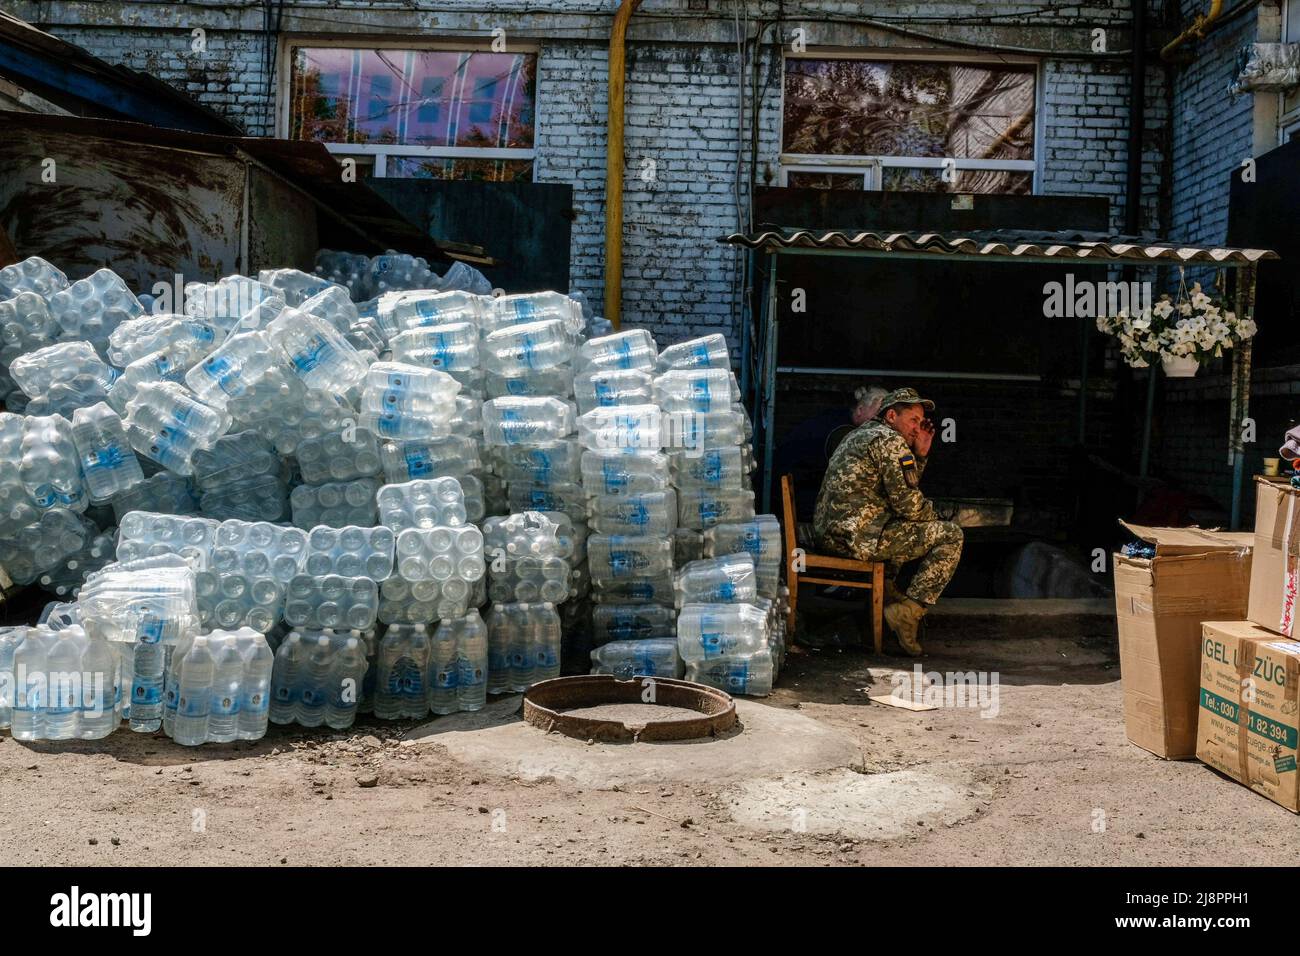 A soldier sits next to a pile of water bottles at Zaporizhia military Hospital. Zaporizhia is an industrial city of Ukraine of about 700.000 inhabitants, it has the biggest hospital of the region where every day many soldiers are brought from war frontline to be treated. Every day refugees from all over eastern Ukraine arrive to Zaporizhia Center for displaced people fleeing from combat zones or occupied territories by the Russian army. Russia invaded Ukraine on 24 February 2022, triggering the largest military attack in Europe since World War II. Stock Photo